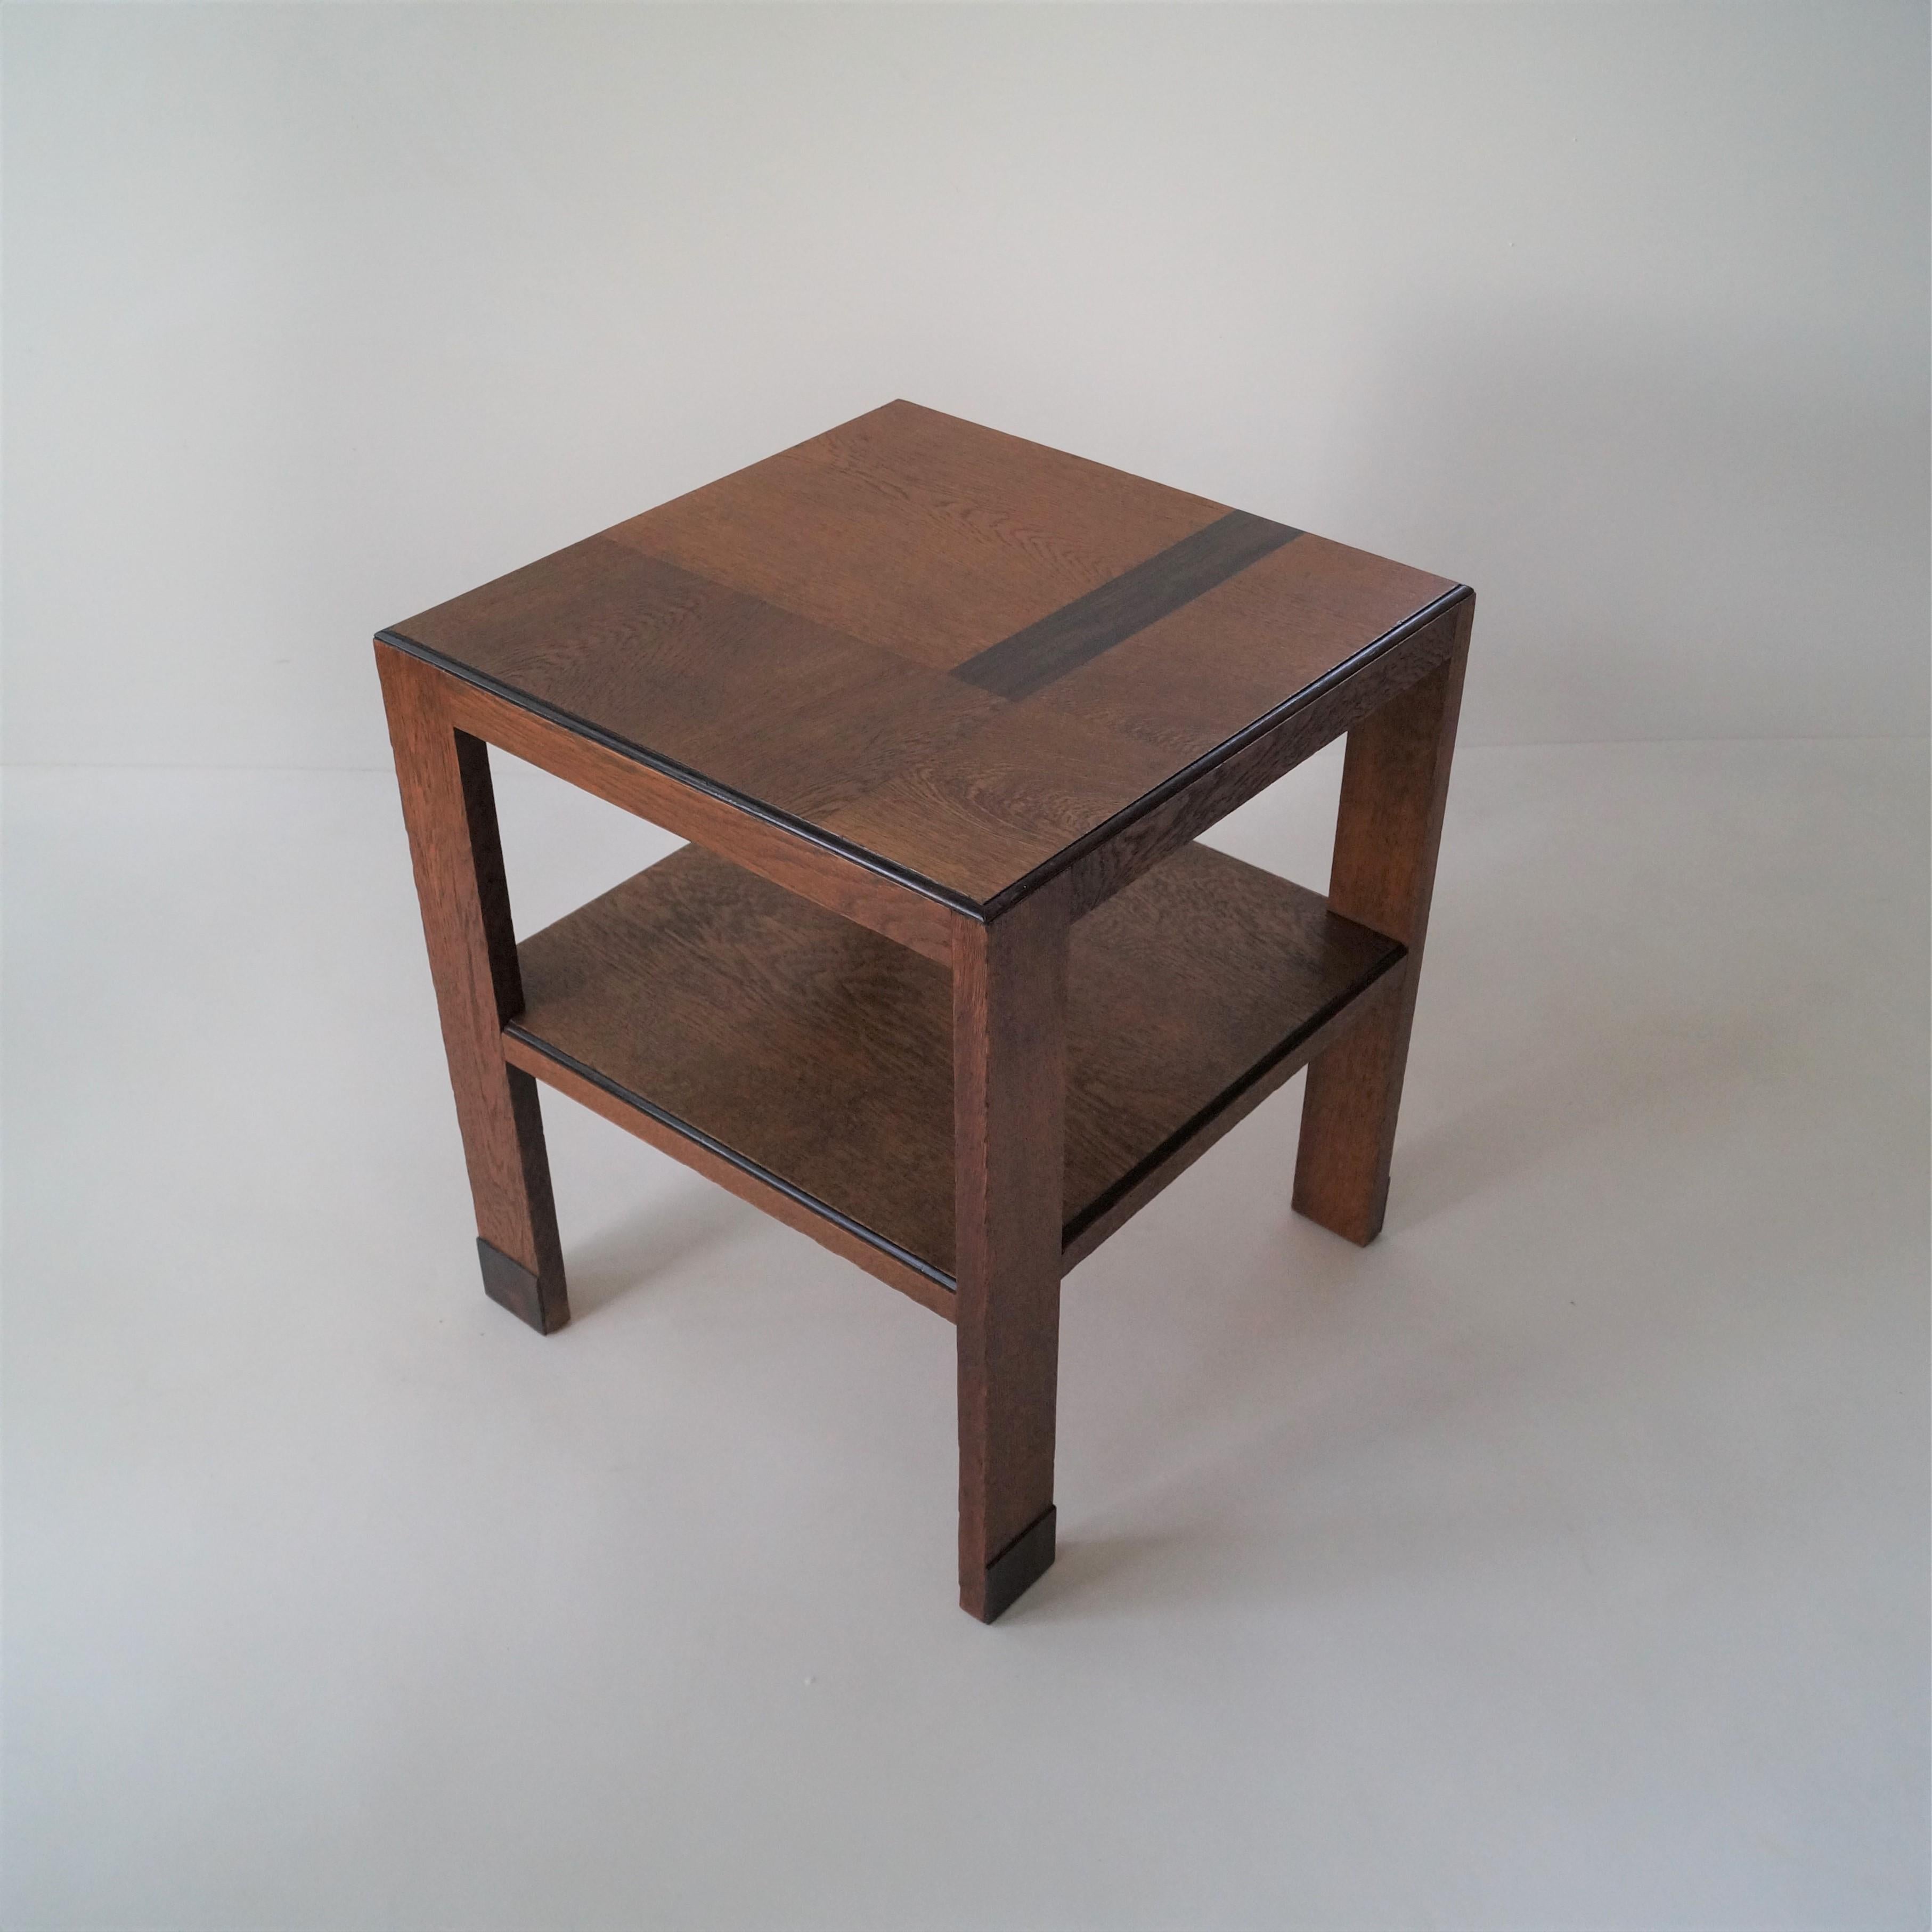 Two tier coffee or side table with a modernist/geometric design from Dutch Art Deco era, ca. 1920. Designed by P.E.L. Izeren for De Genneper Molen. The style is called ''Haagse School'' (The Hague School), which stands for the luxurious and modern